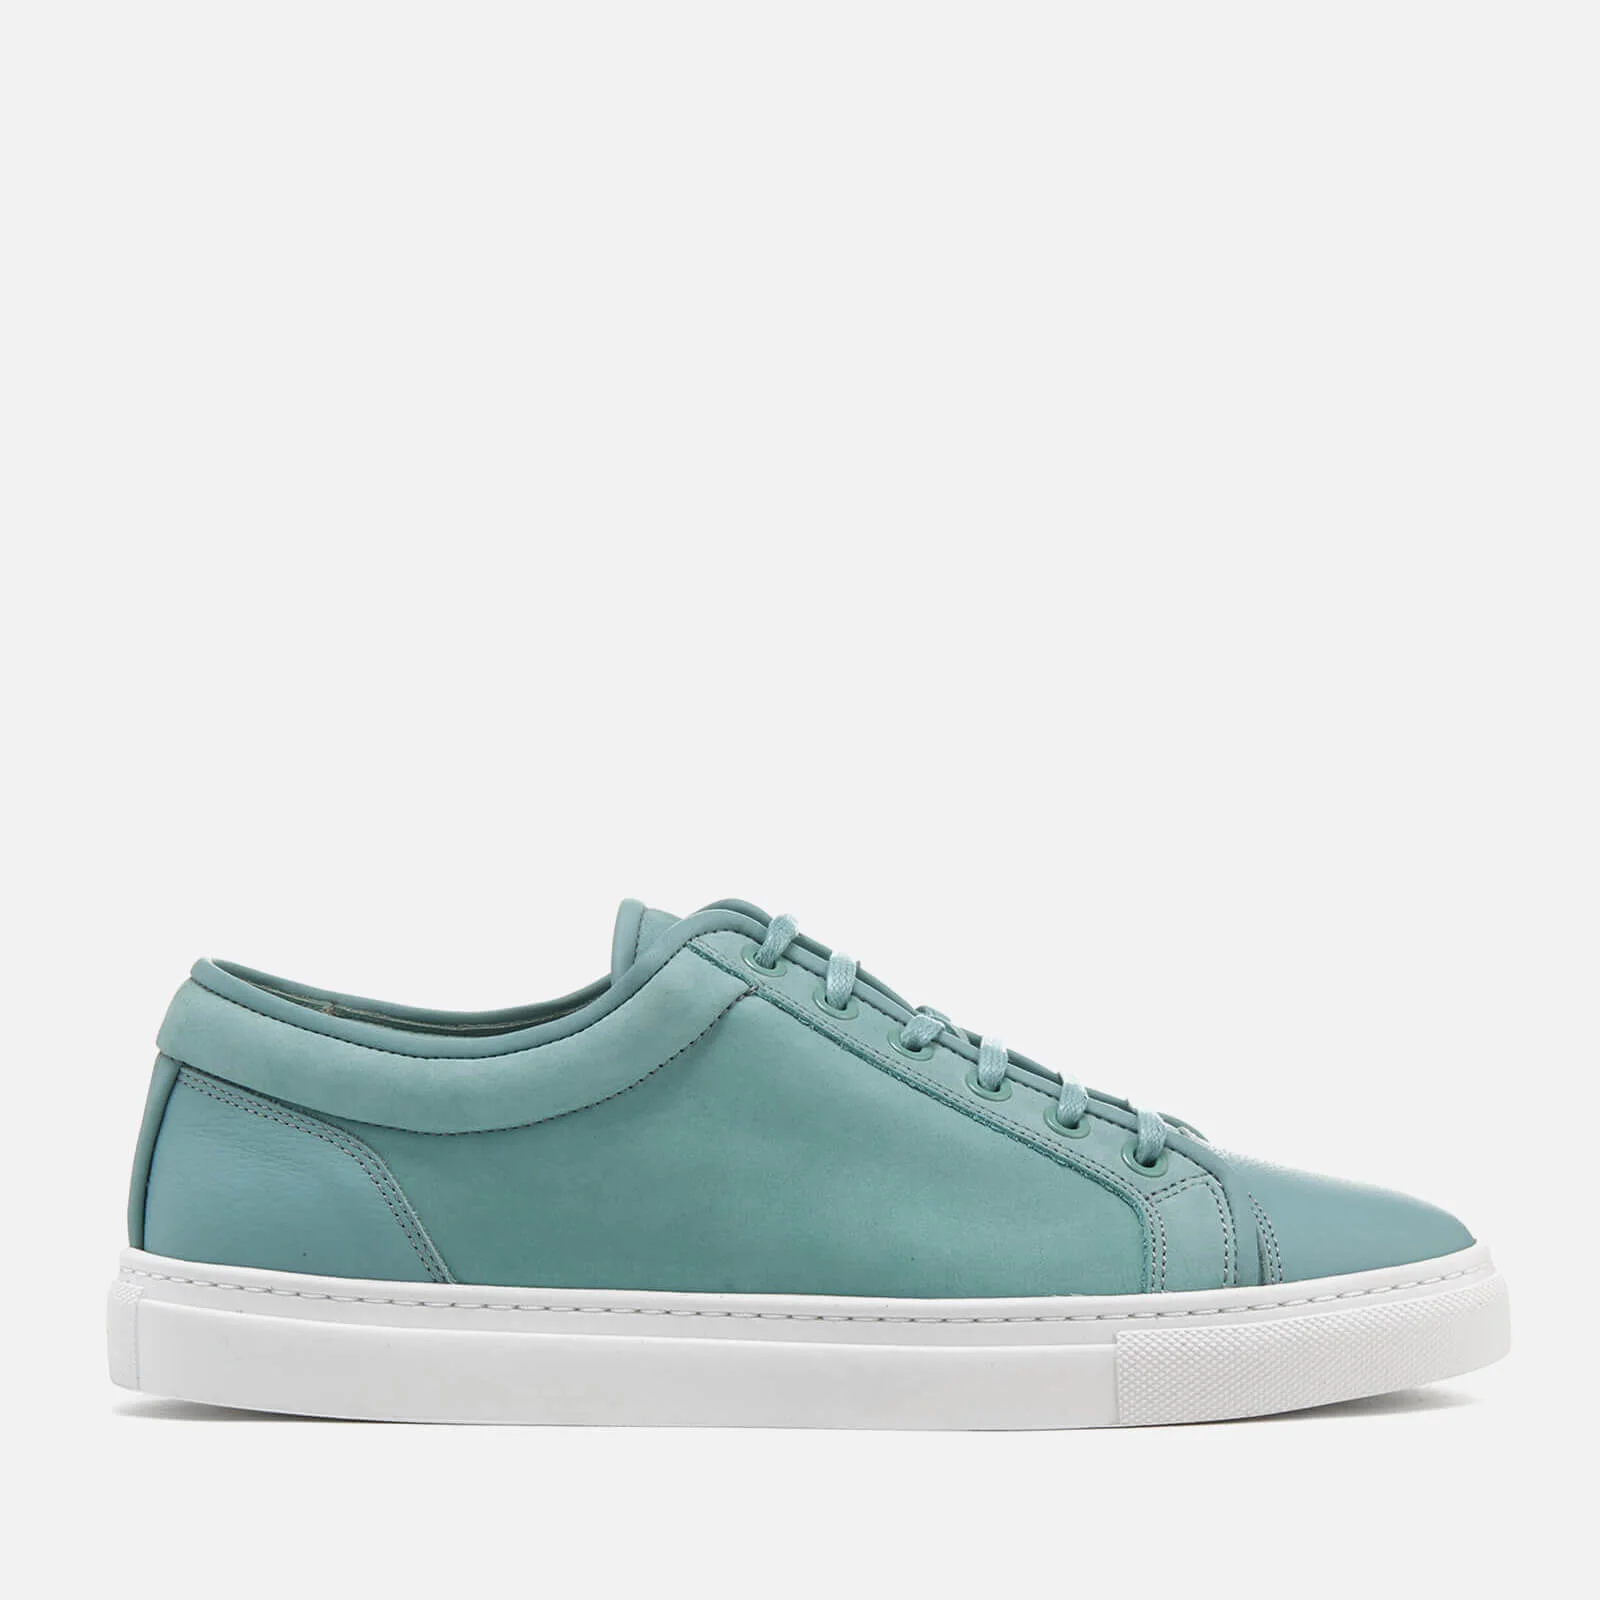 ETQ. Men's Low Top 1 Leather Trainers - Mint Image 1